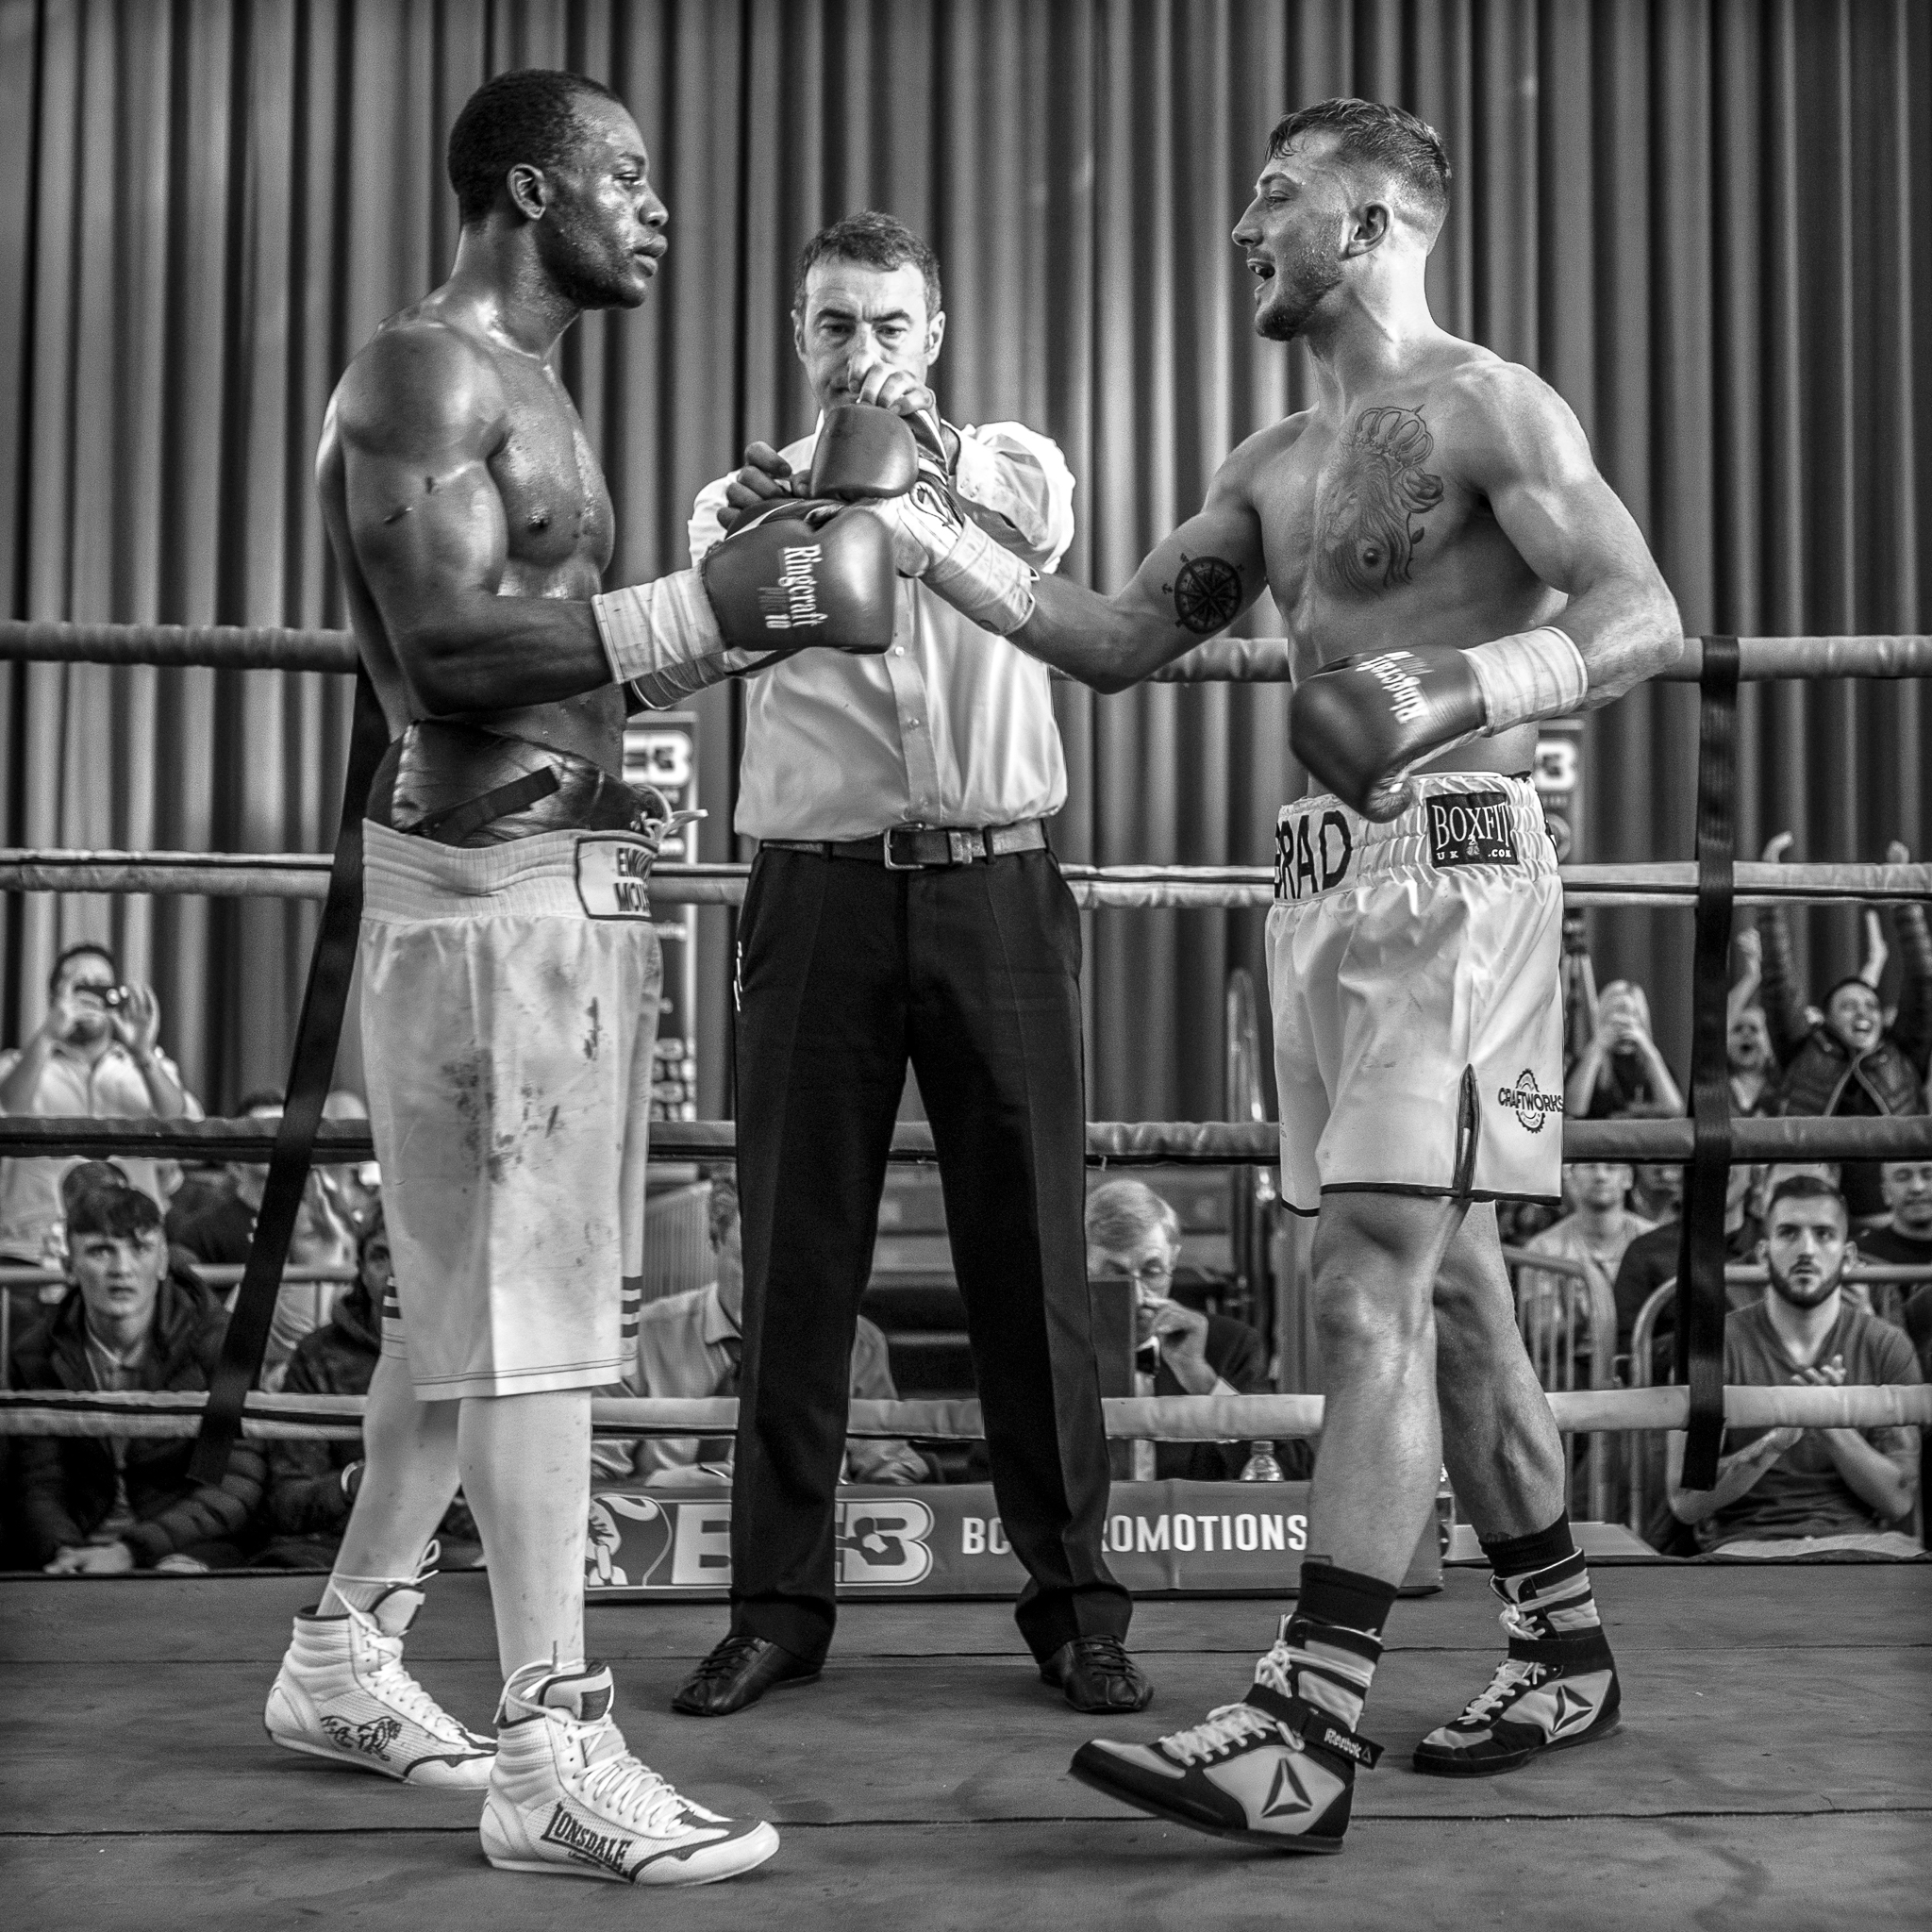 Black and White Boxing Photograph at Plymouth